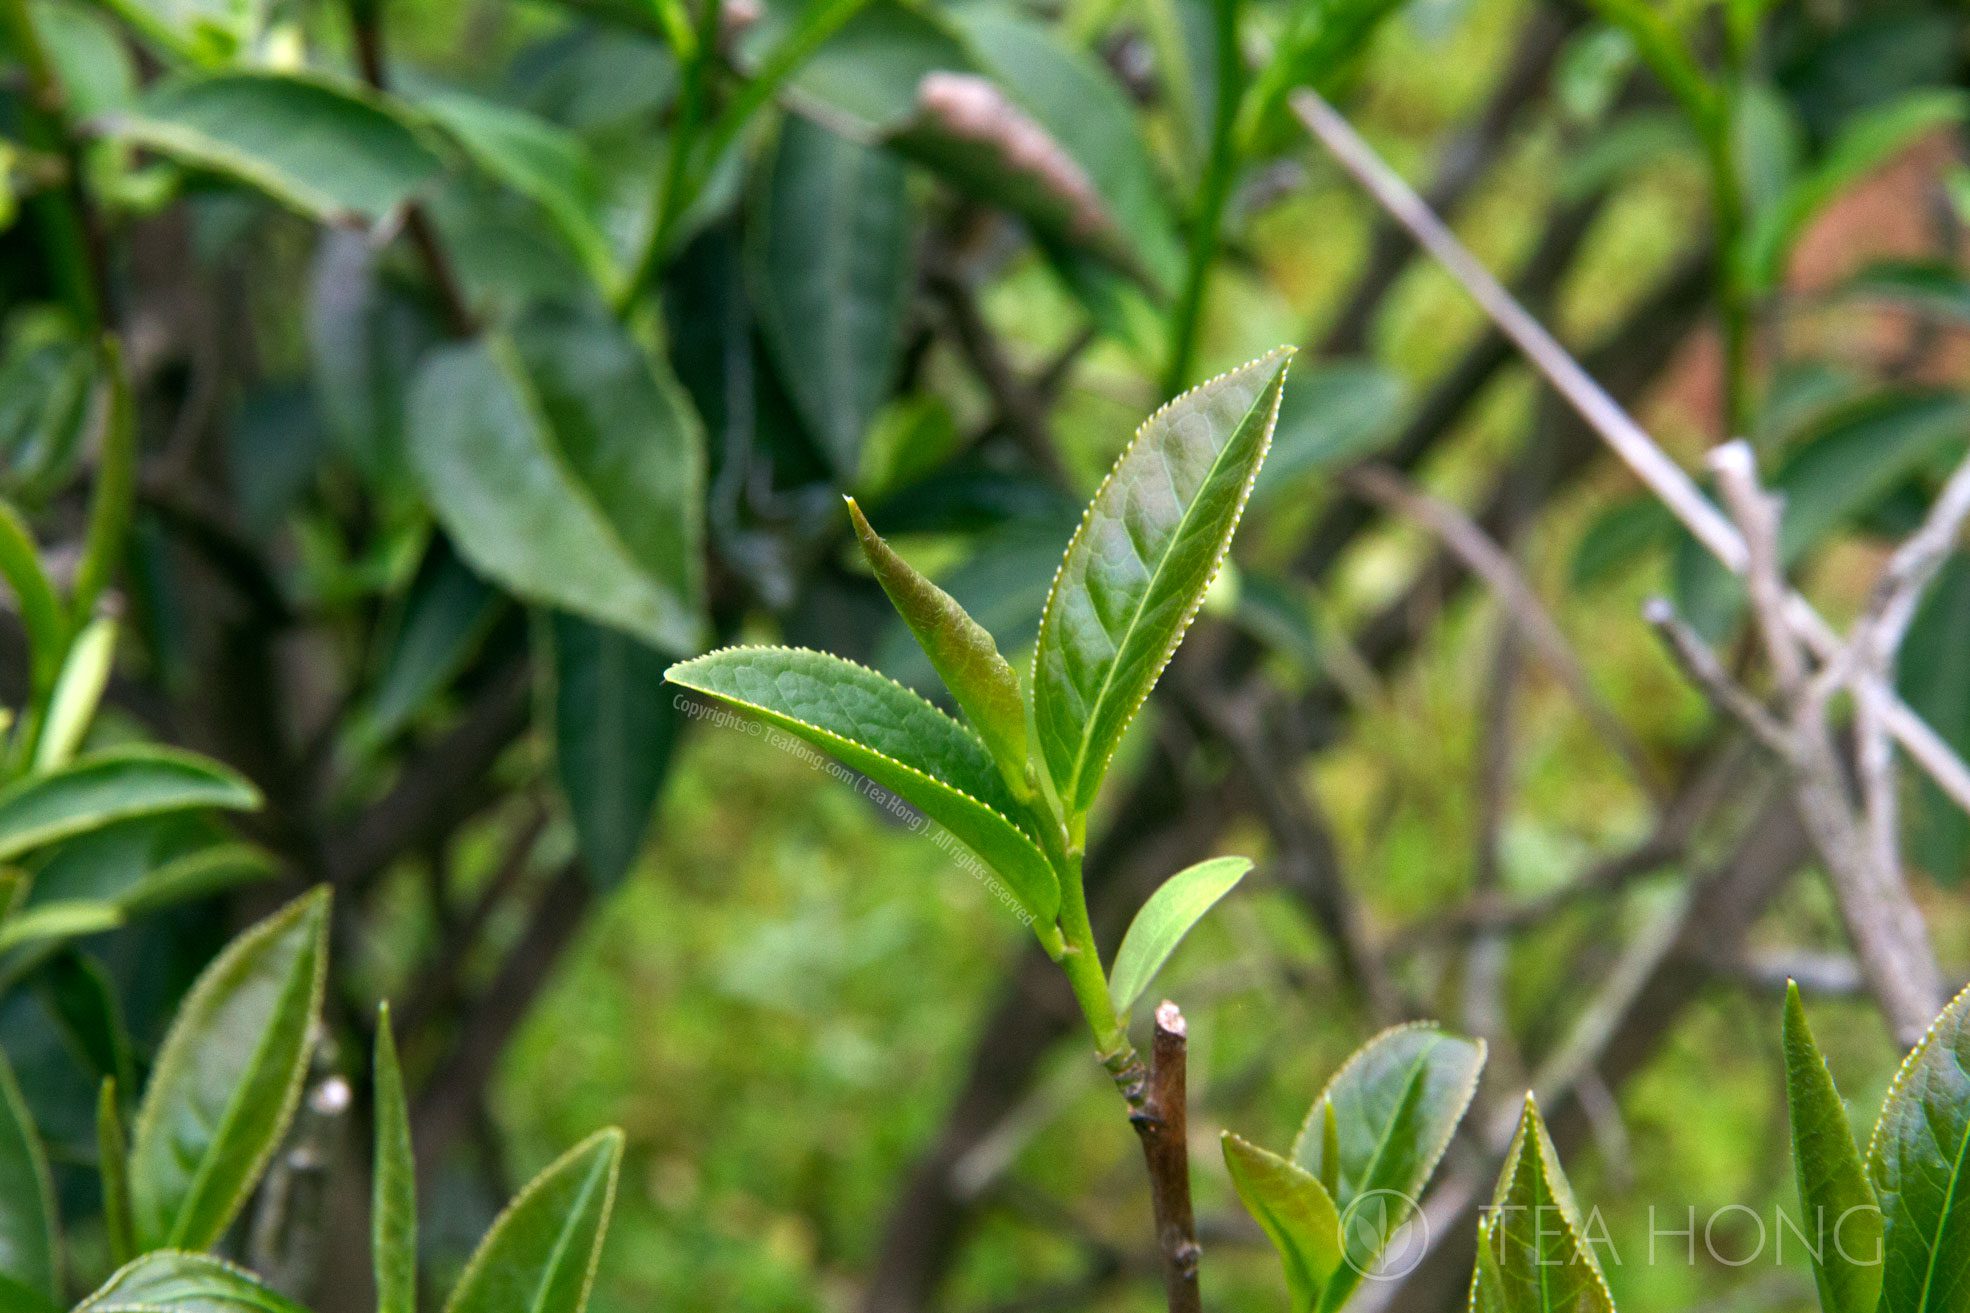 Young leaf shoot of the tea plant